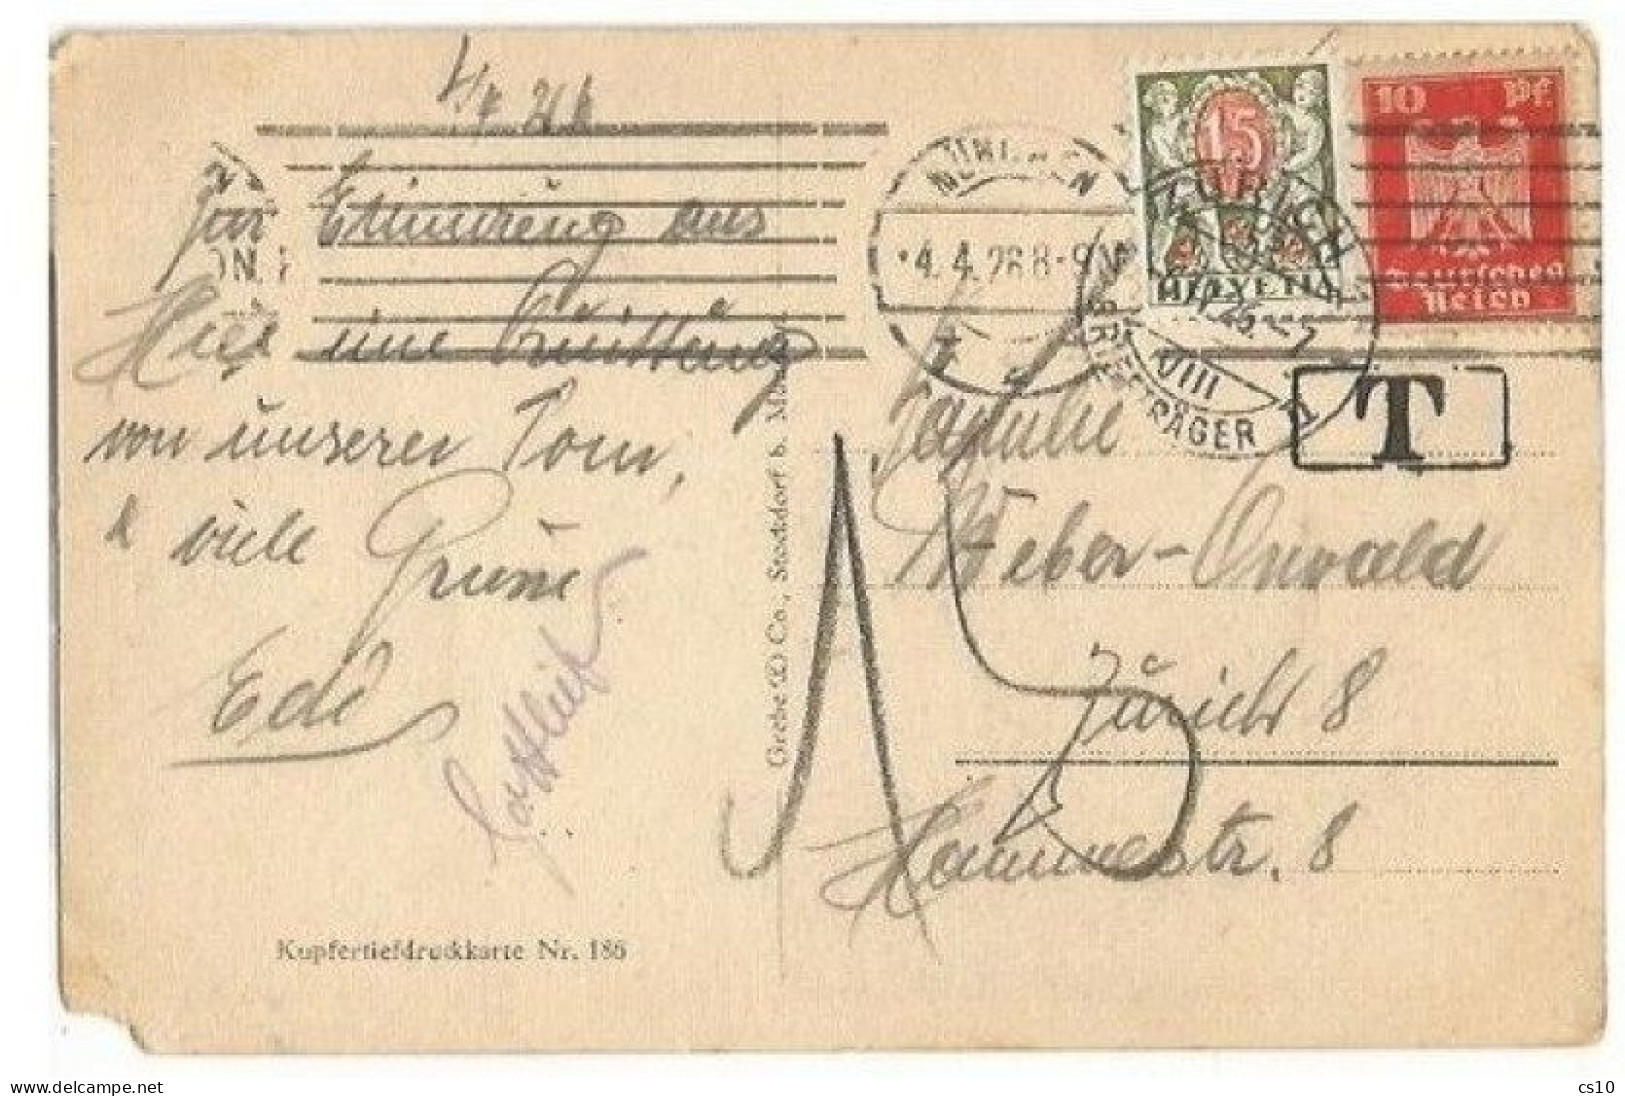 Suisse 6apr1926 Postage Due C.15 Taxing Pcard Munchen 4apr With Eagle Pf10 Solo To Zurich - Segnatasse